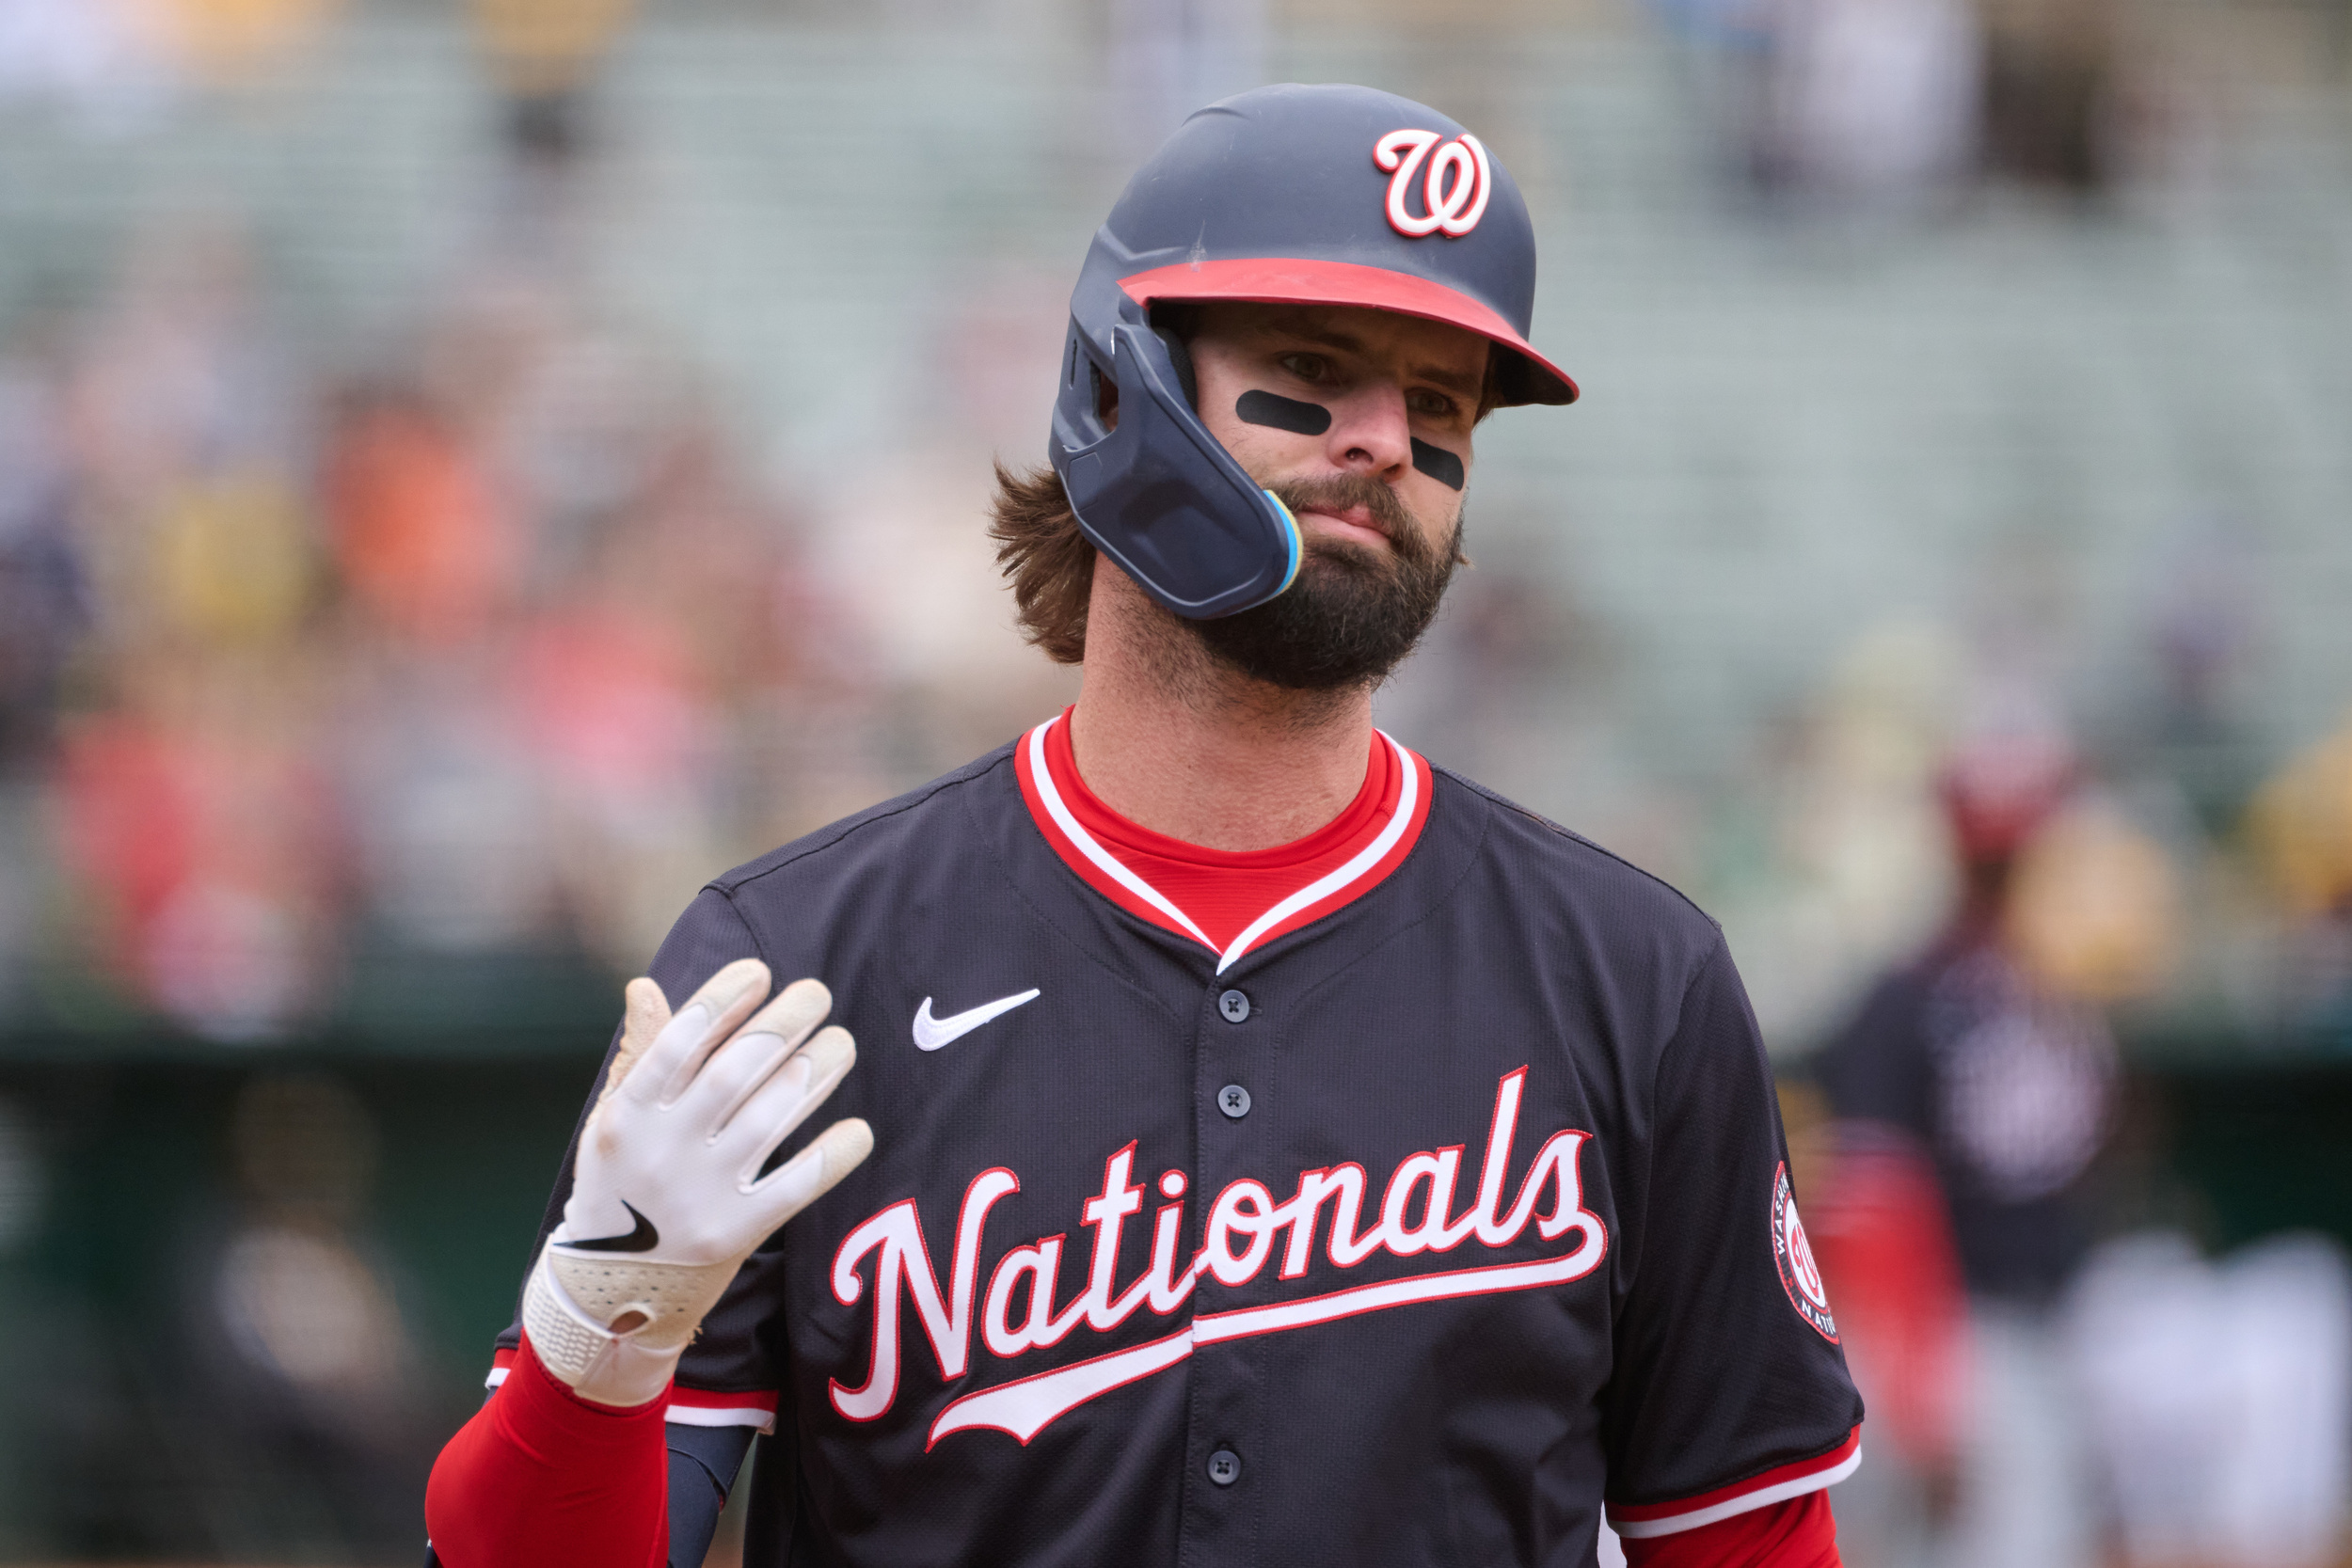 nationals outfielder jesse winker looking like his old self